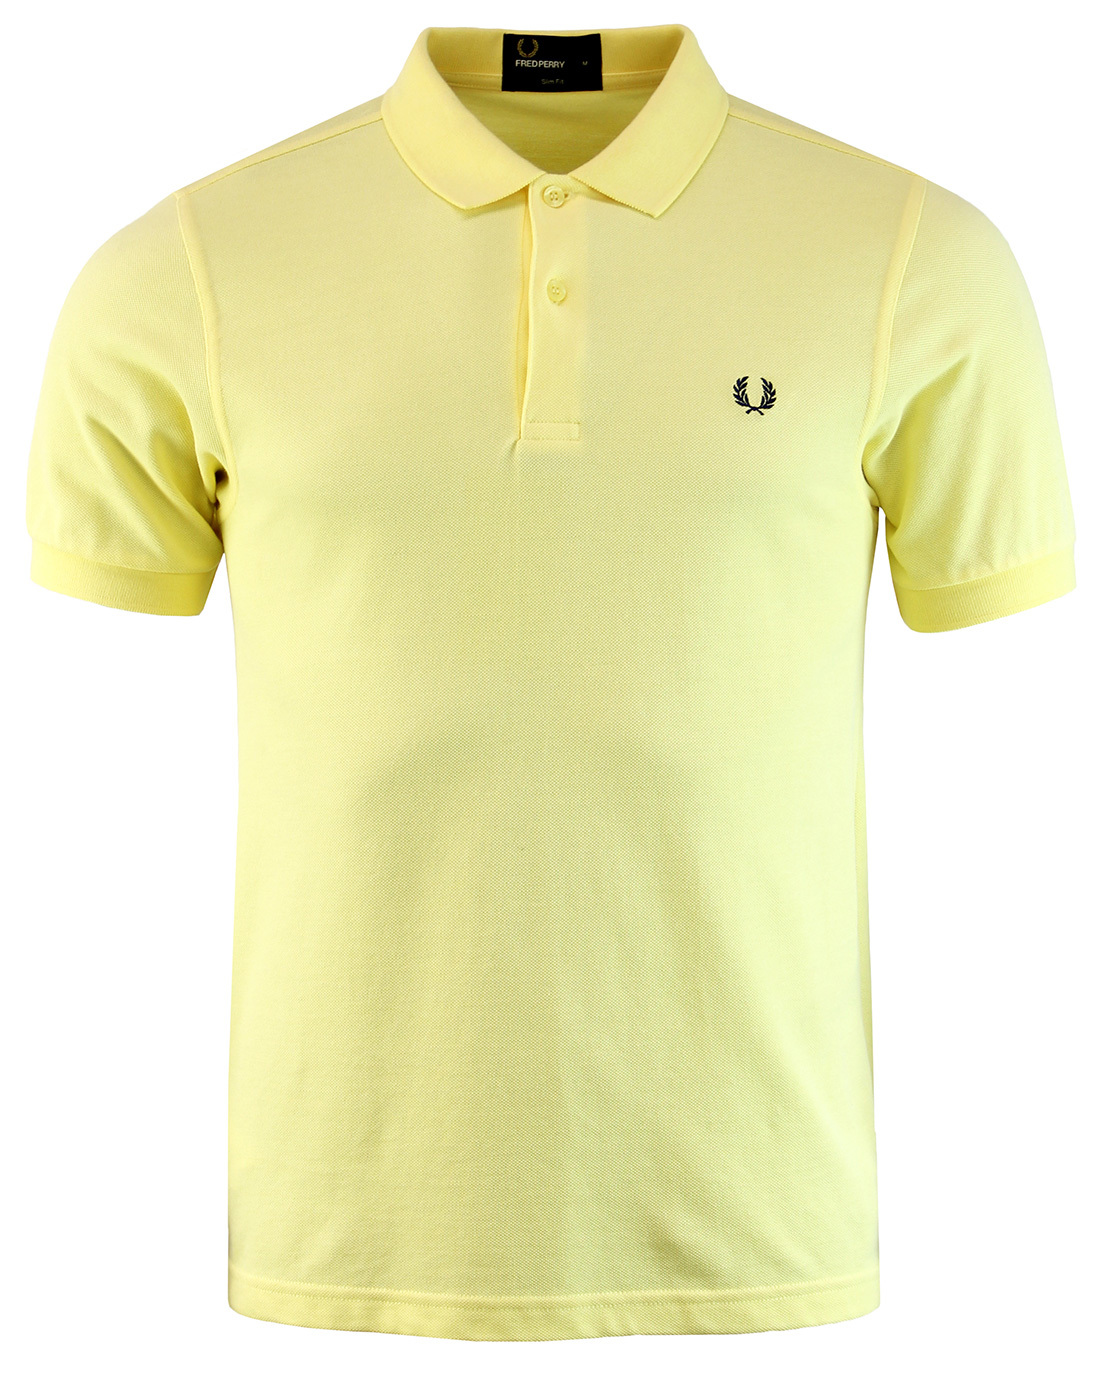 FRED PERRY Men's M6000 Slim Fit Polo Shirt Yellow